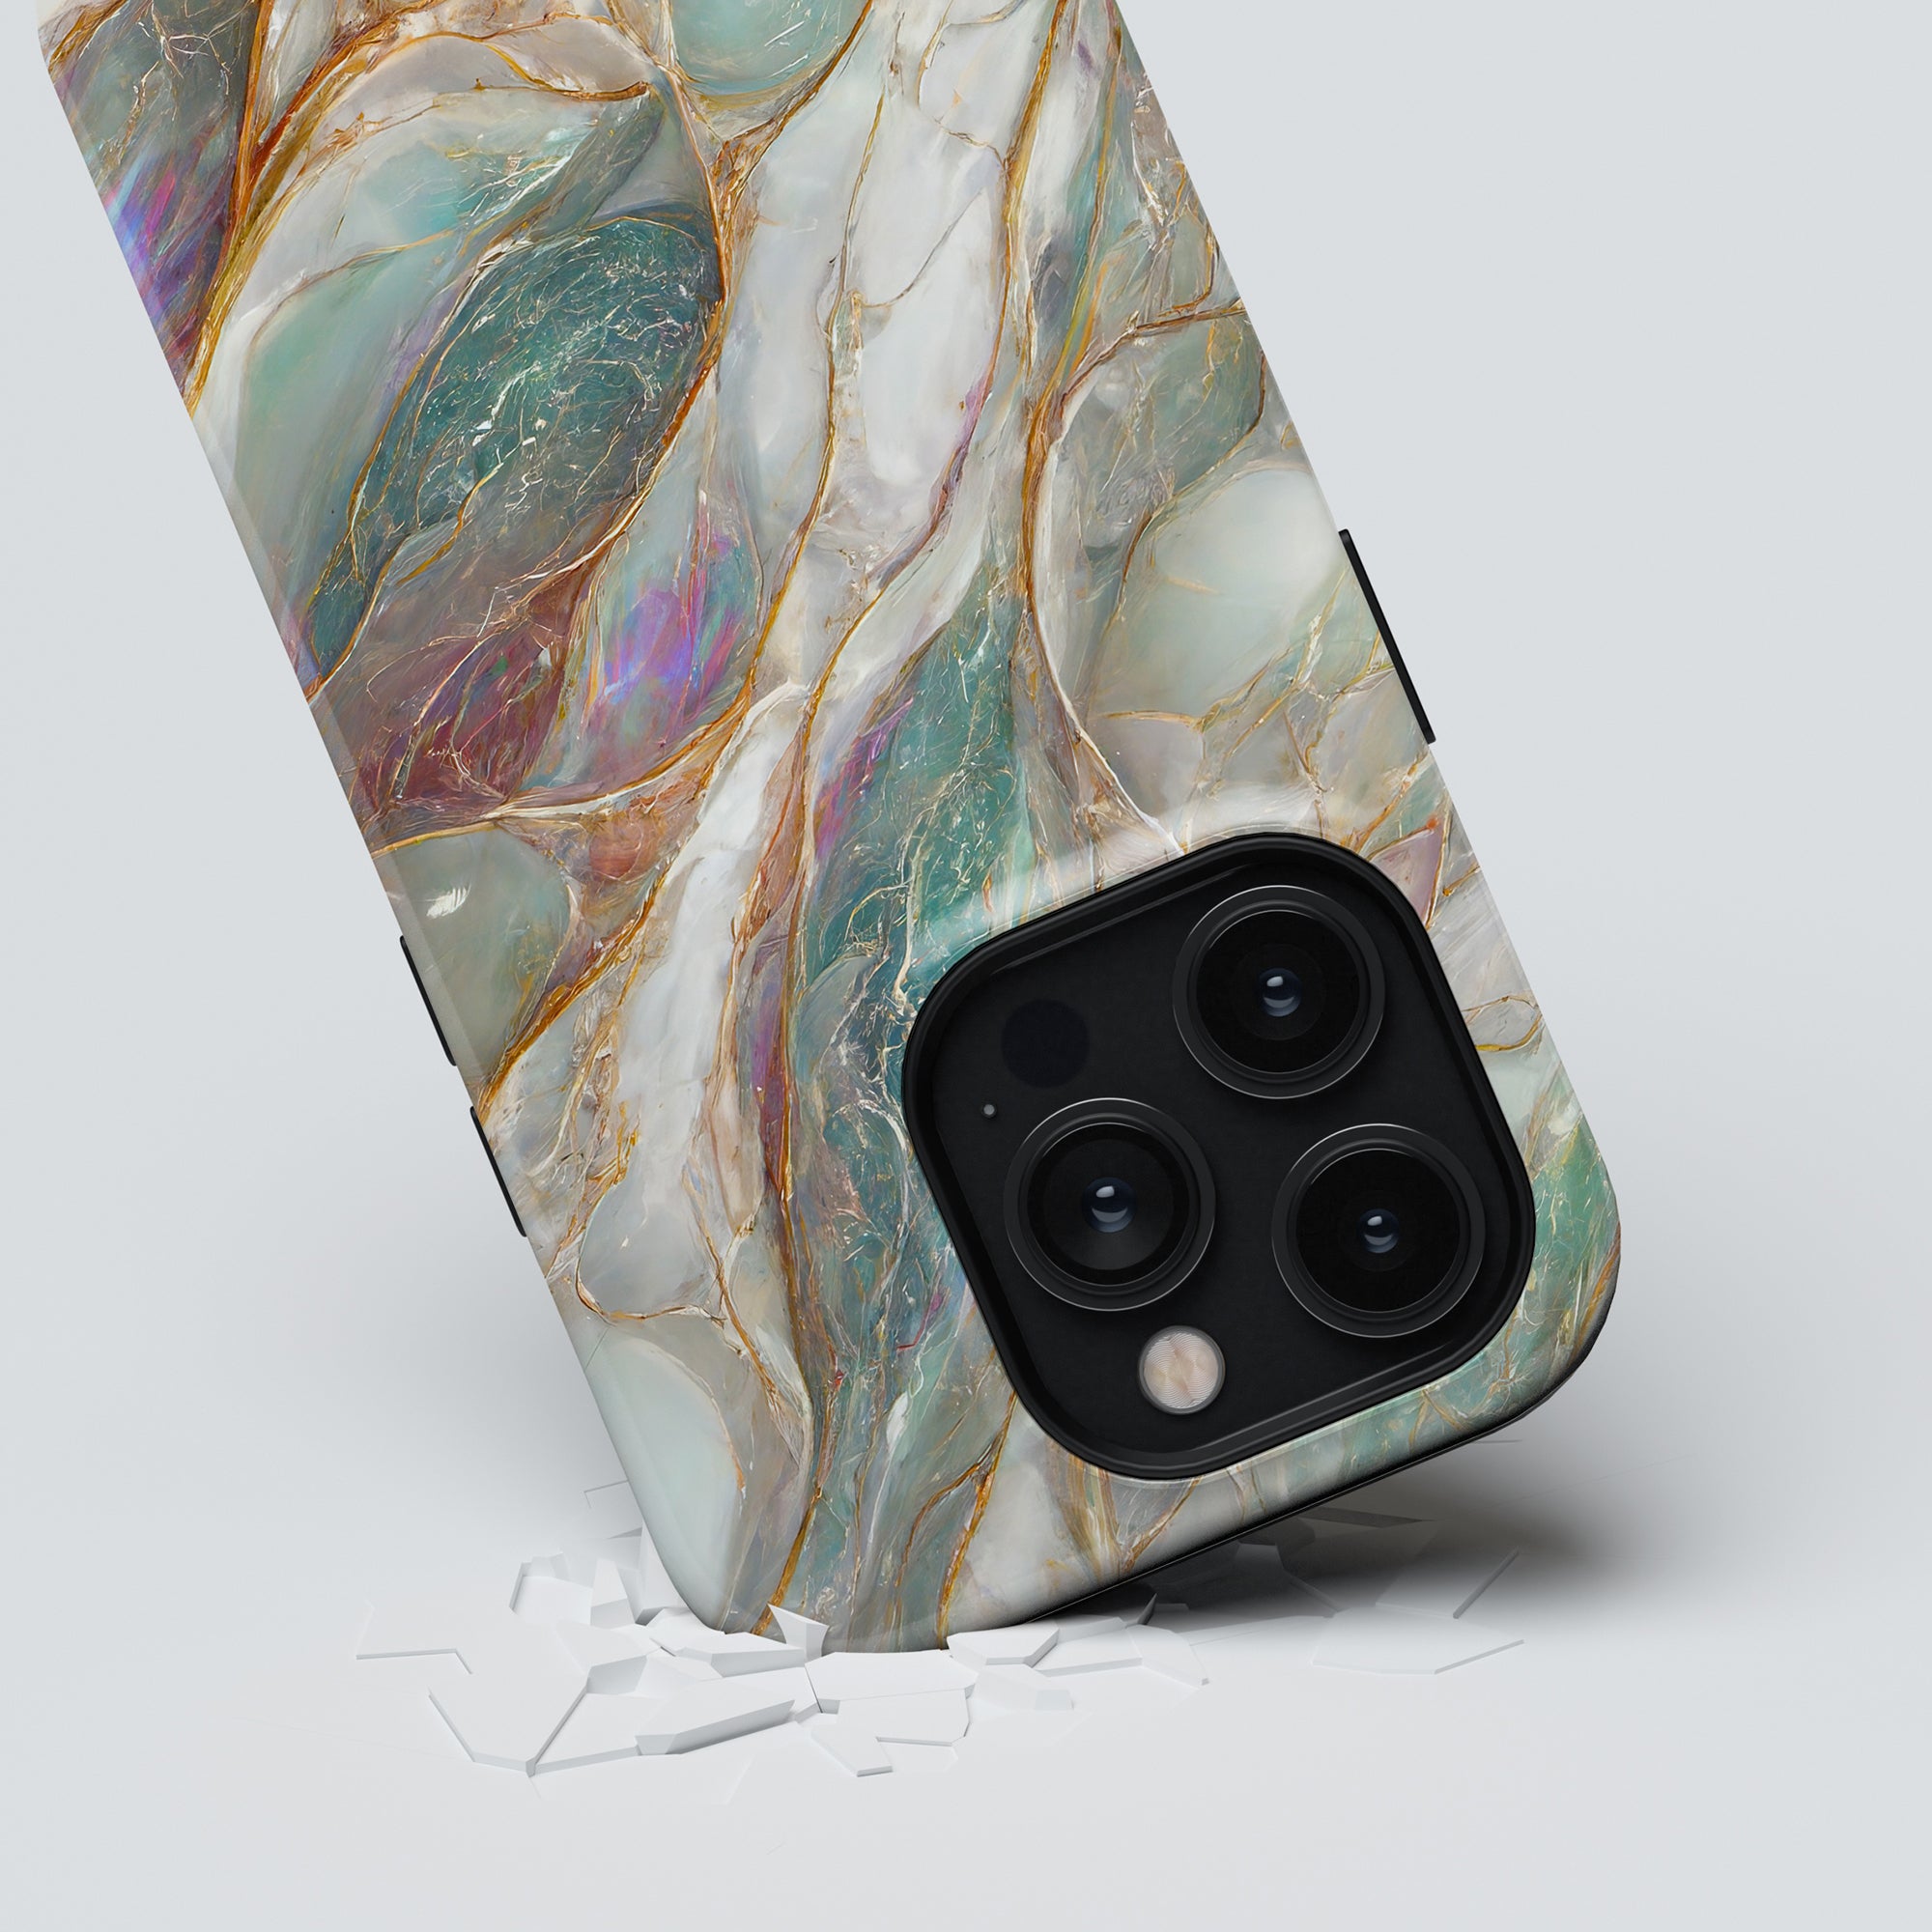 A smartphone with a Mother of Pearl - Tough Case lying on a cracked white surface.